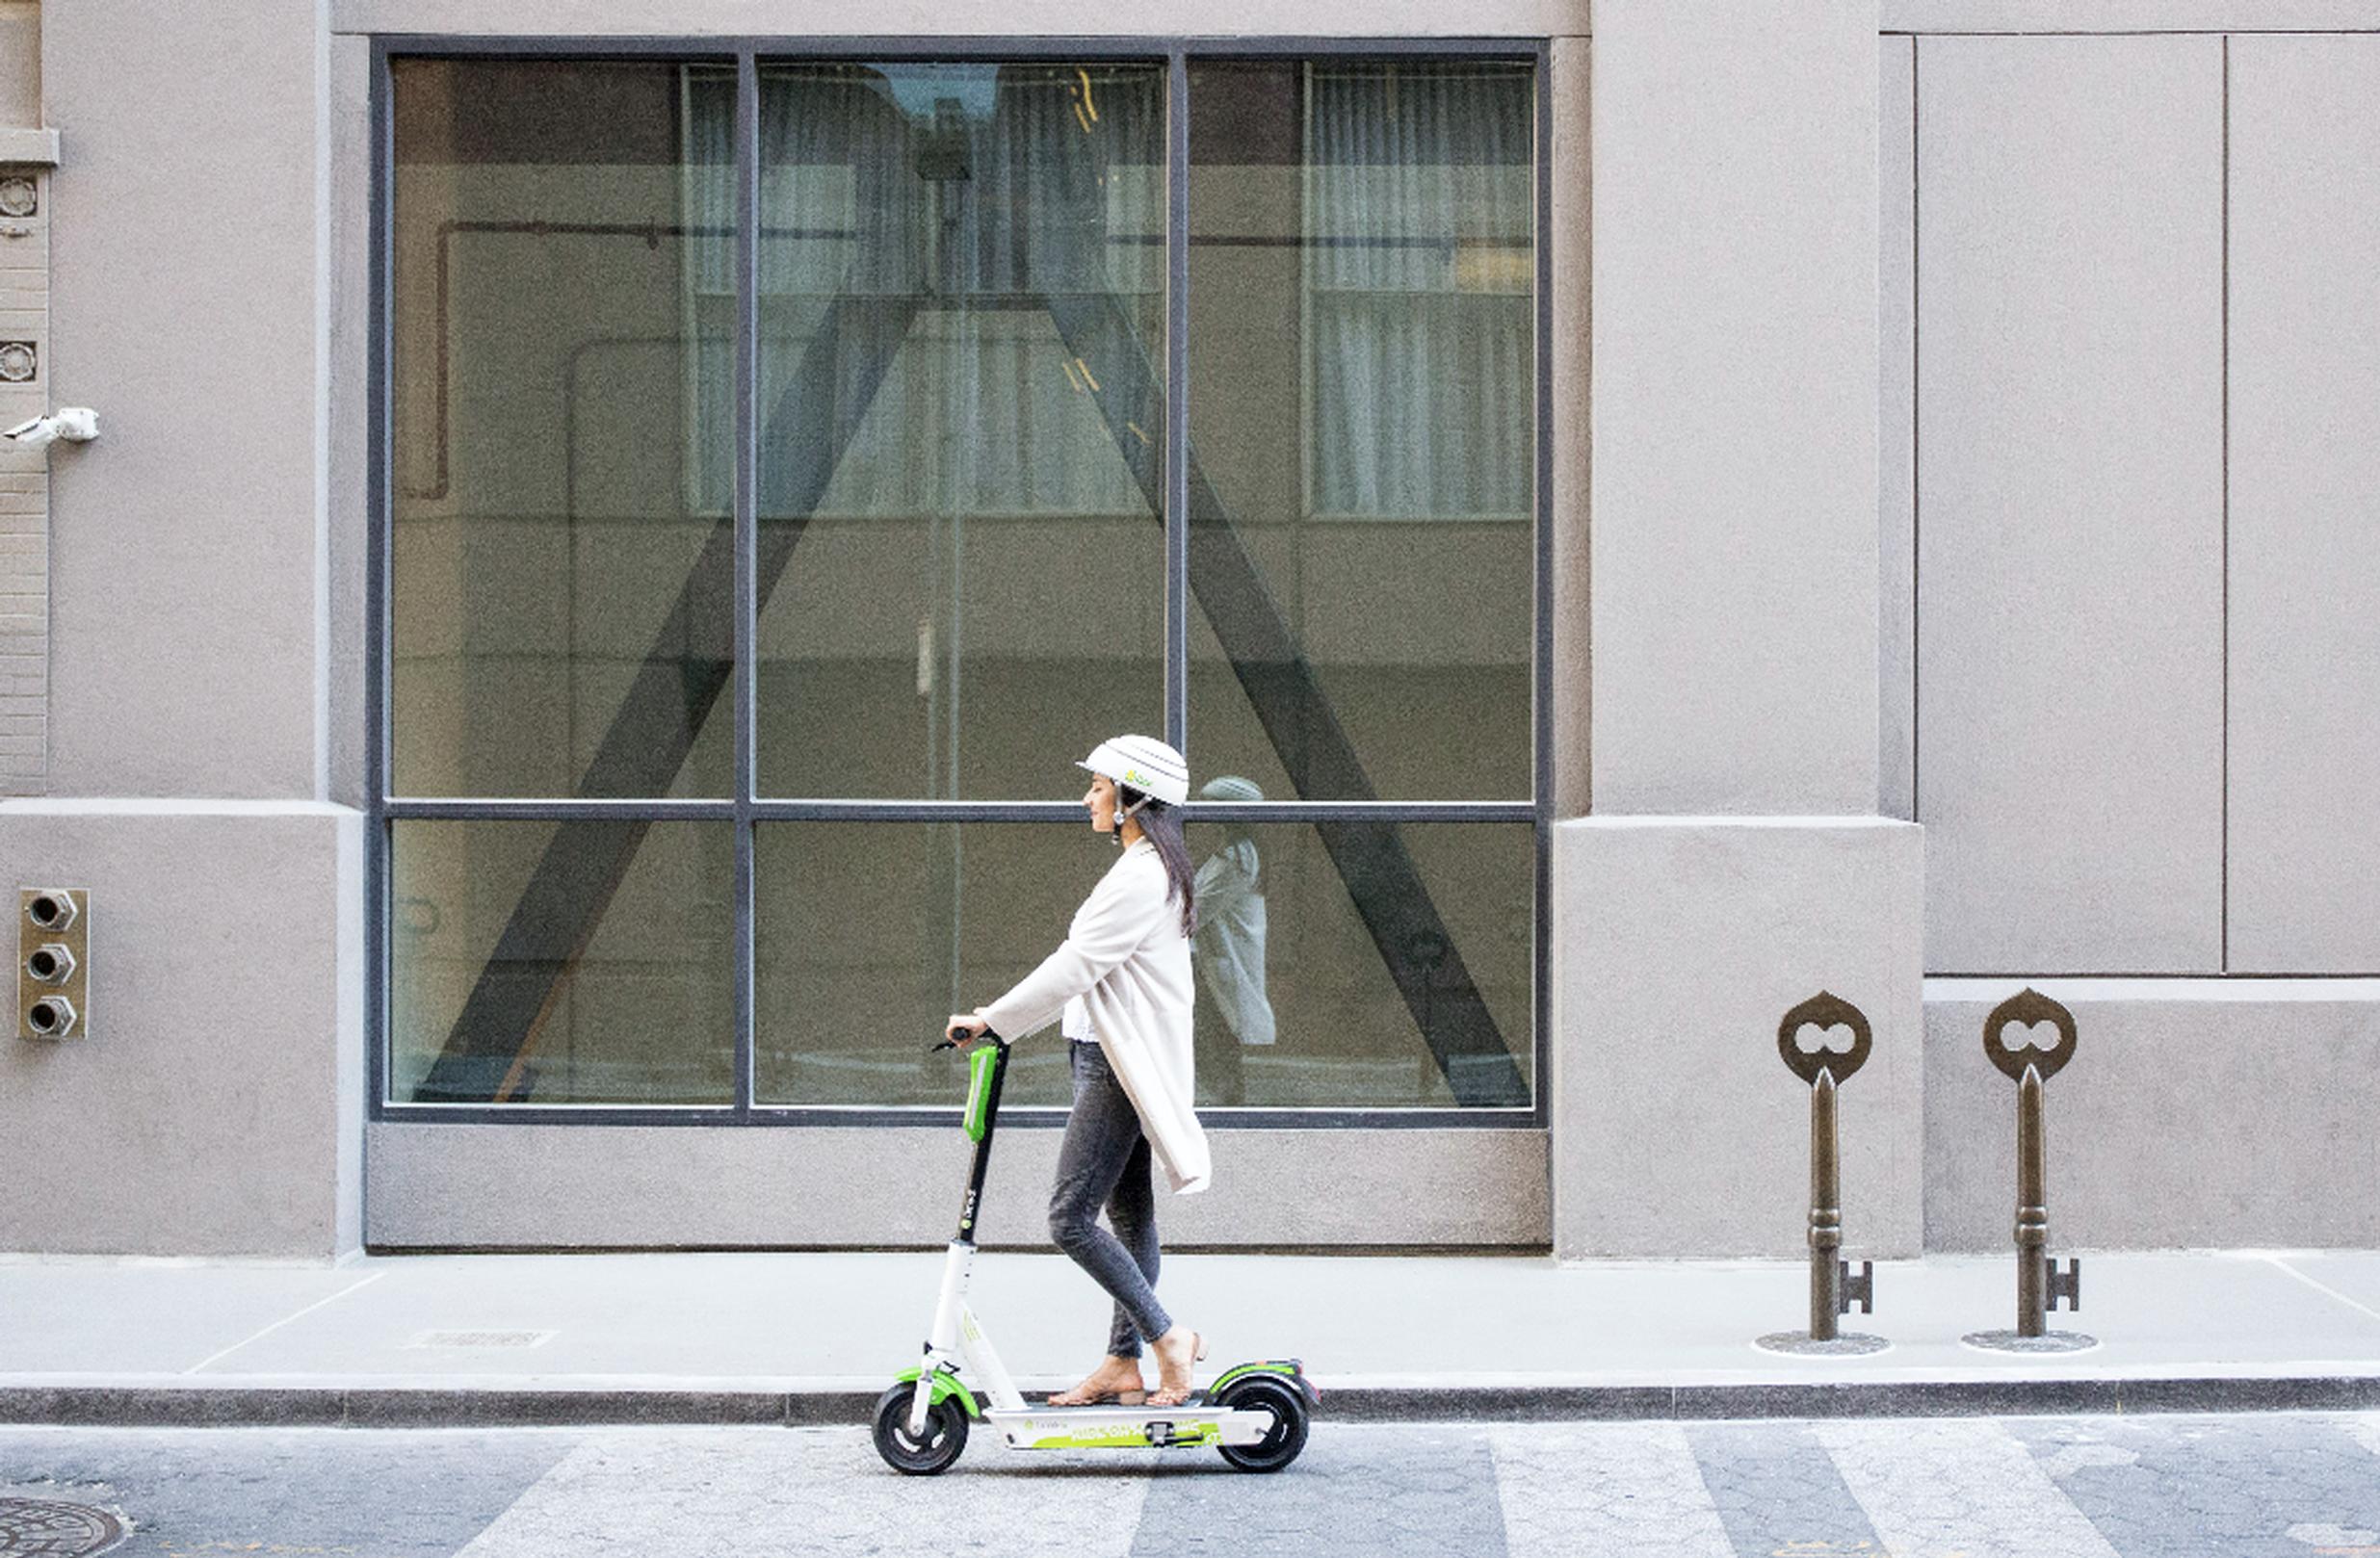 E-scooters are growing in popularity